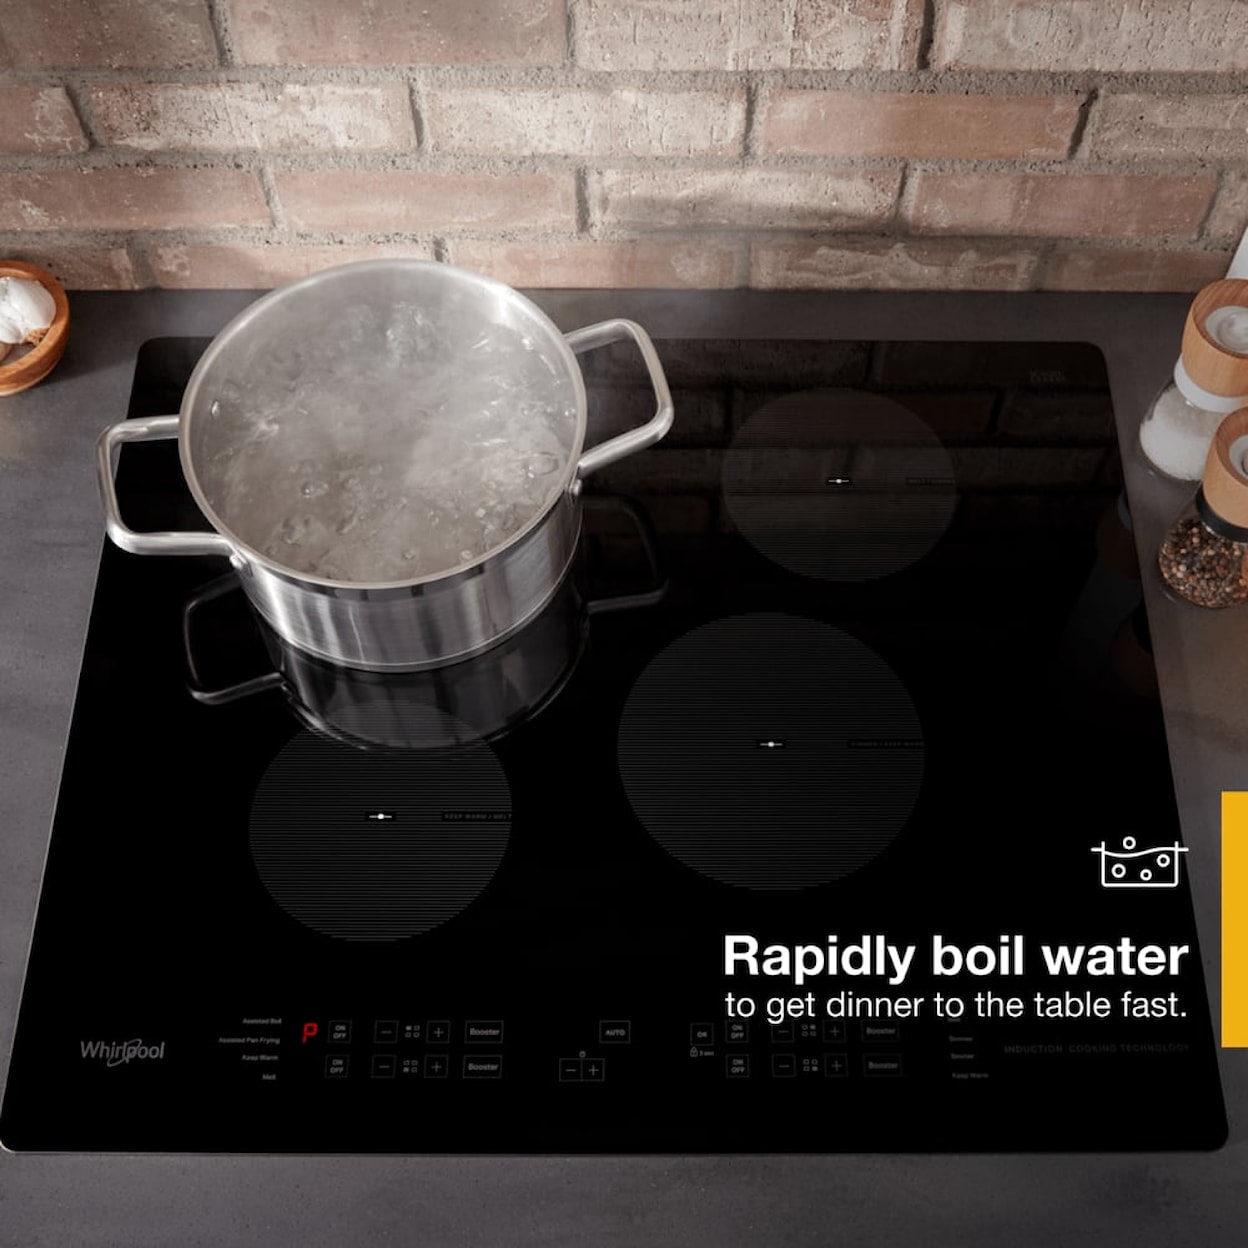 Whirlpool Electric Ranges Cooktop